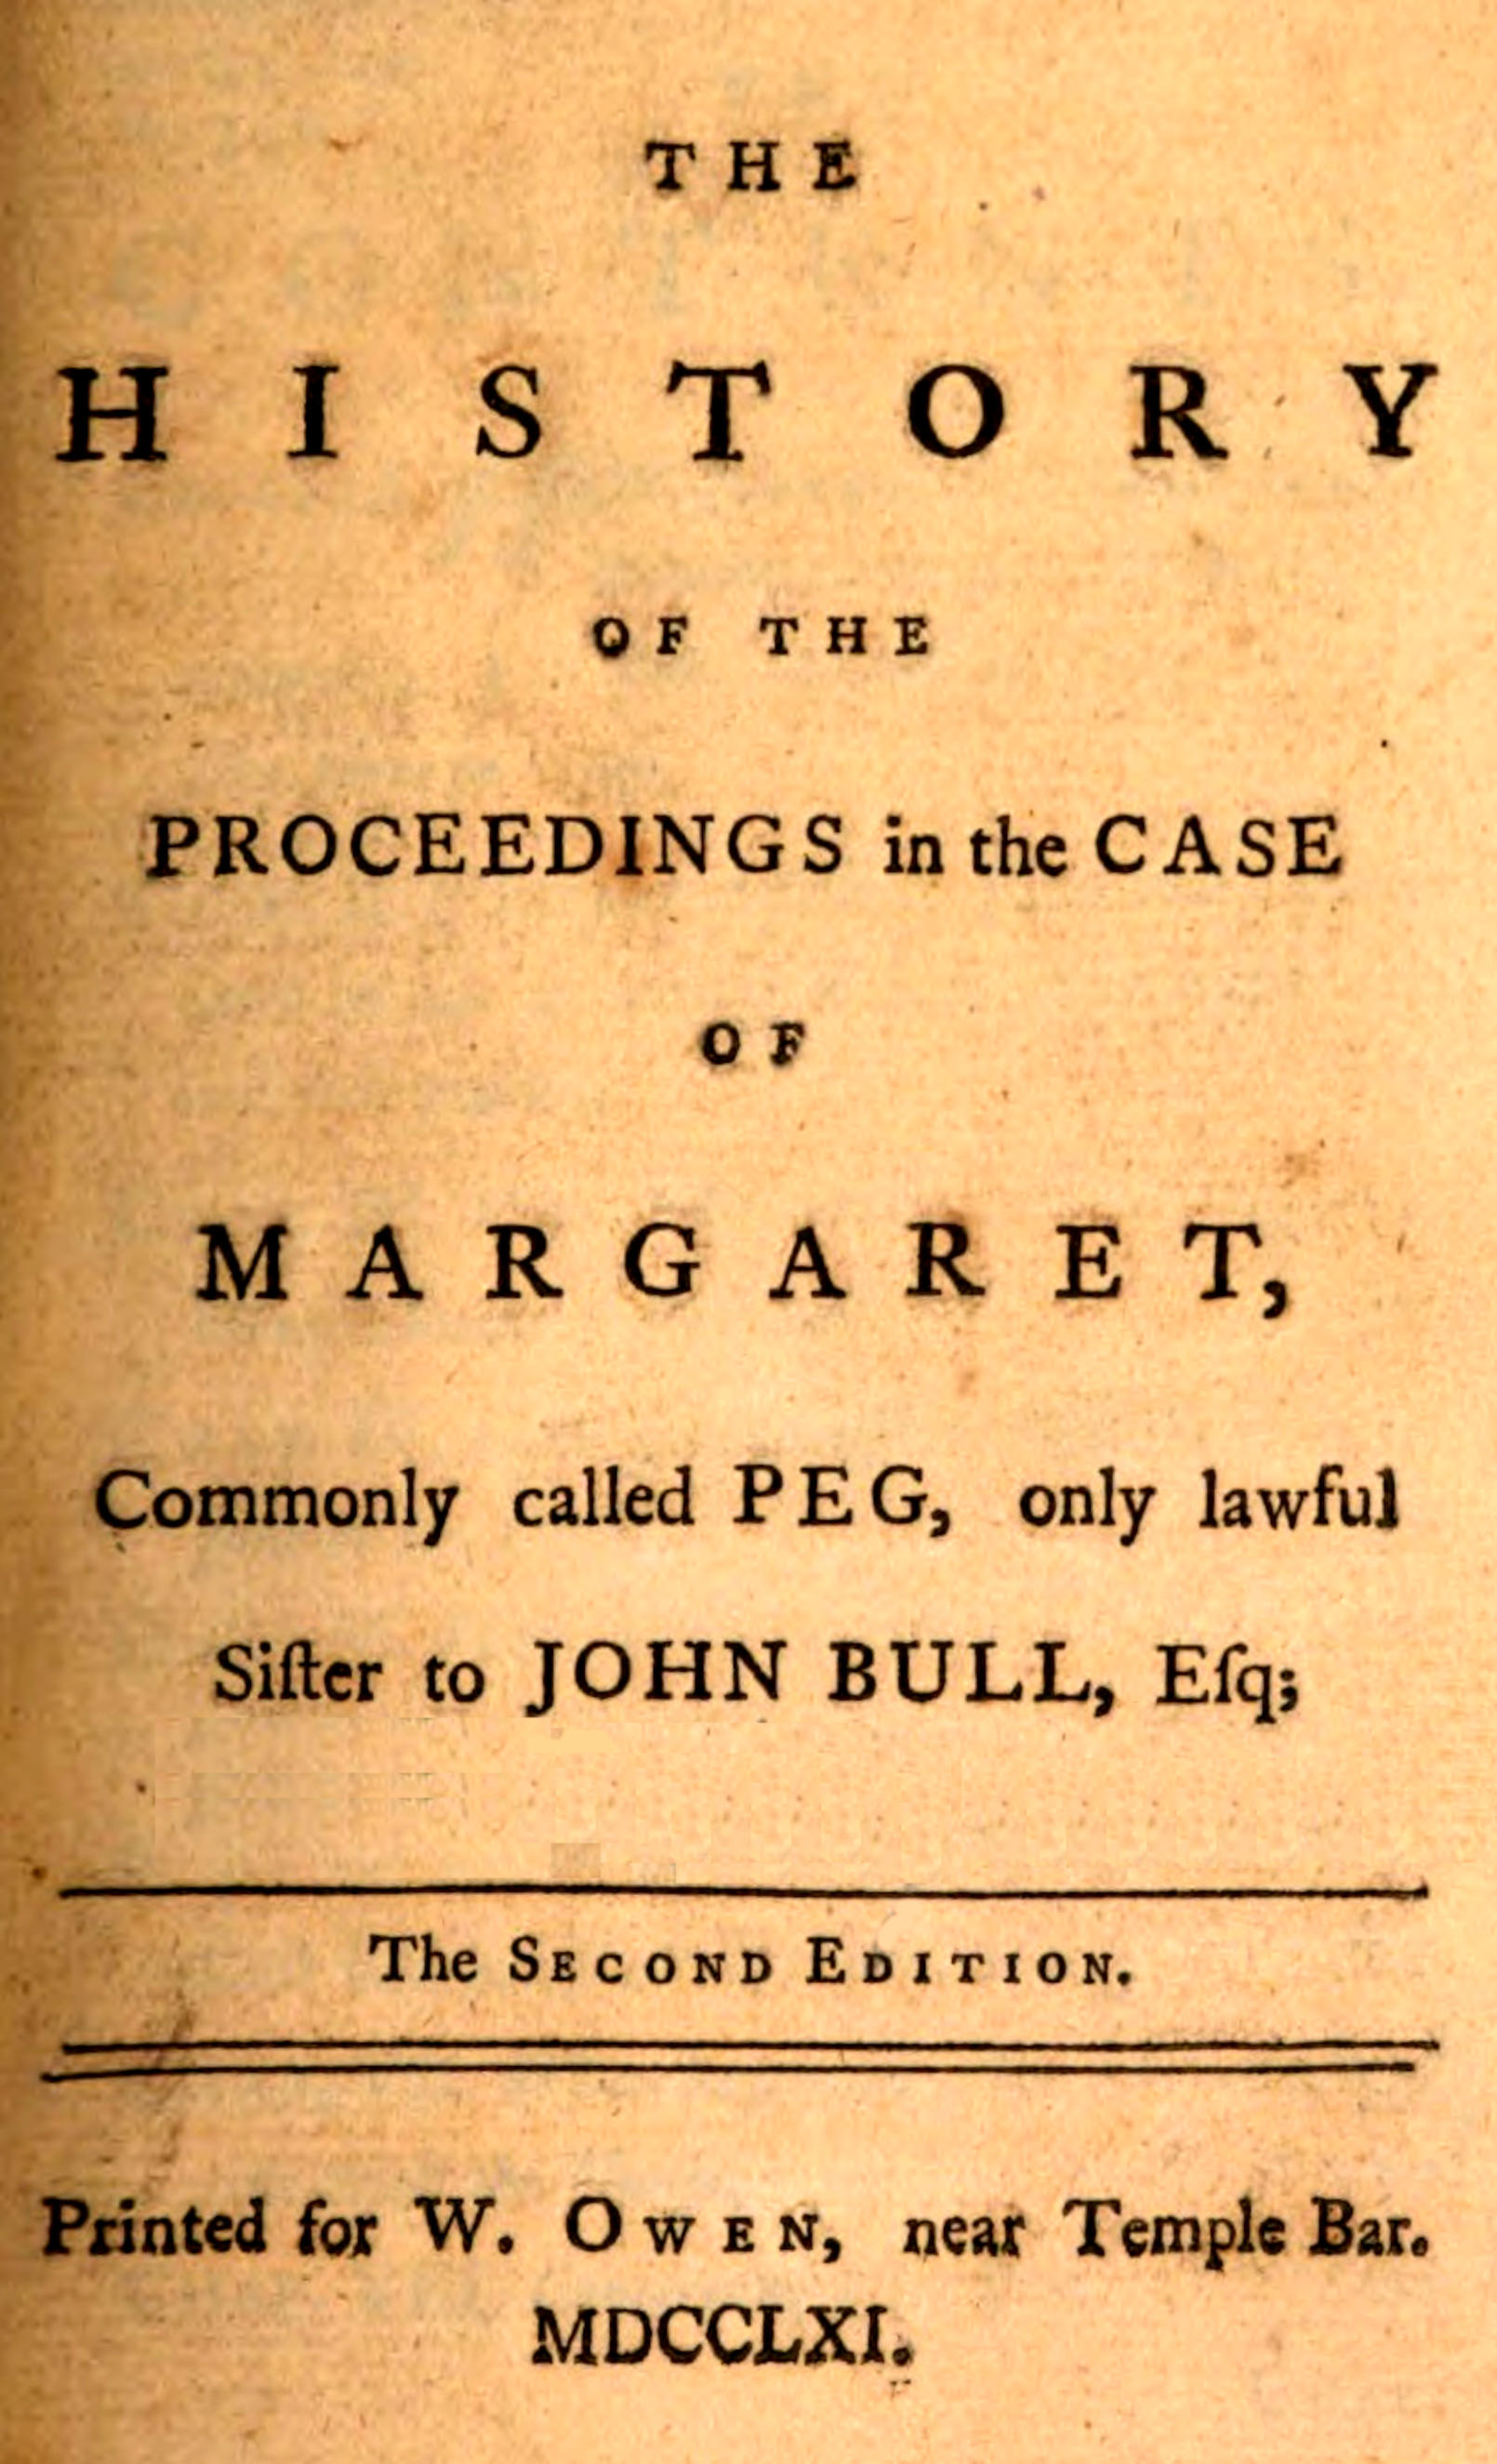 The history of the proceedings in the case of Margaret, commonly called Peg, only lawful sister to John Bull, Esq.